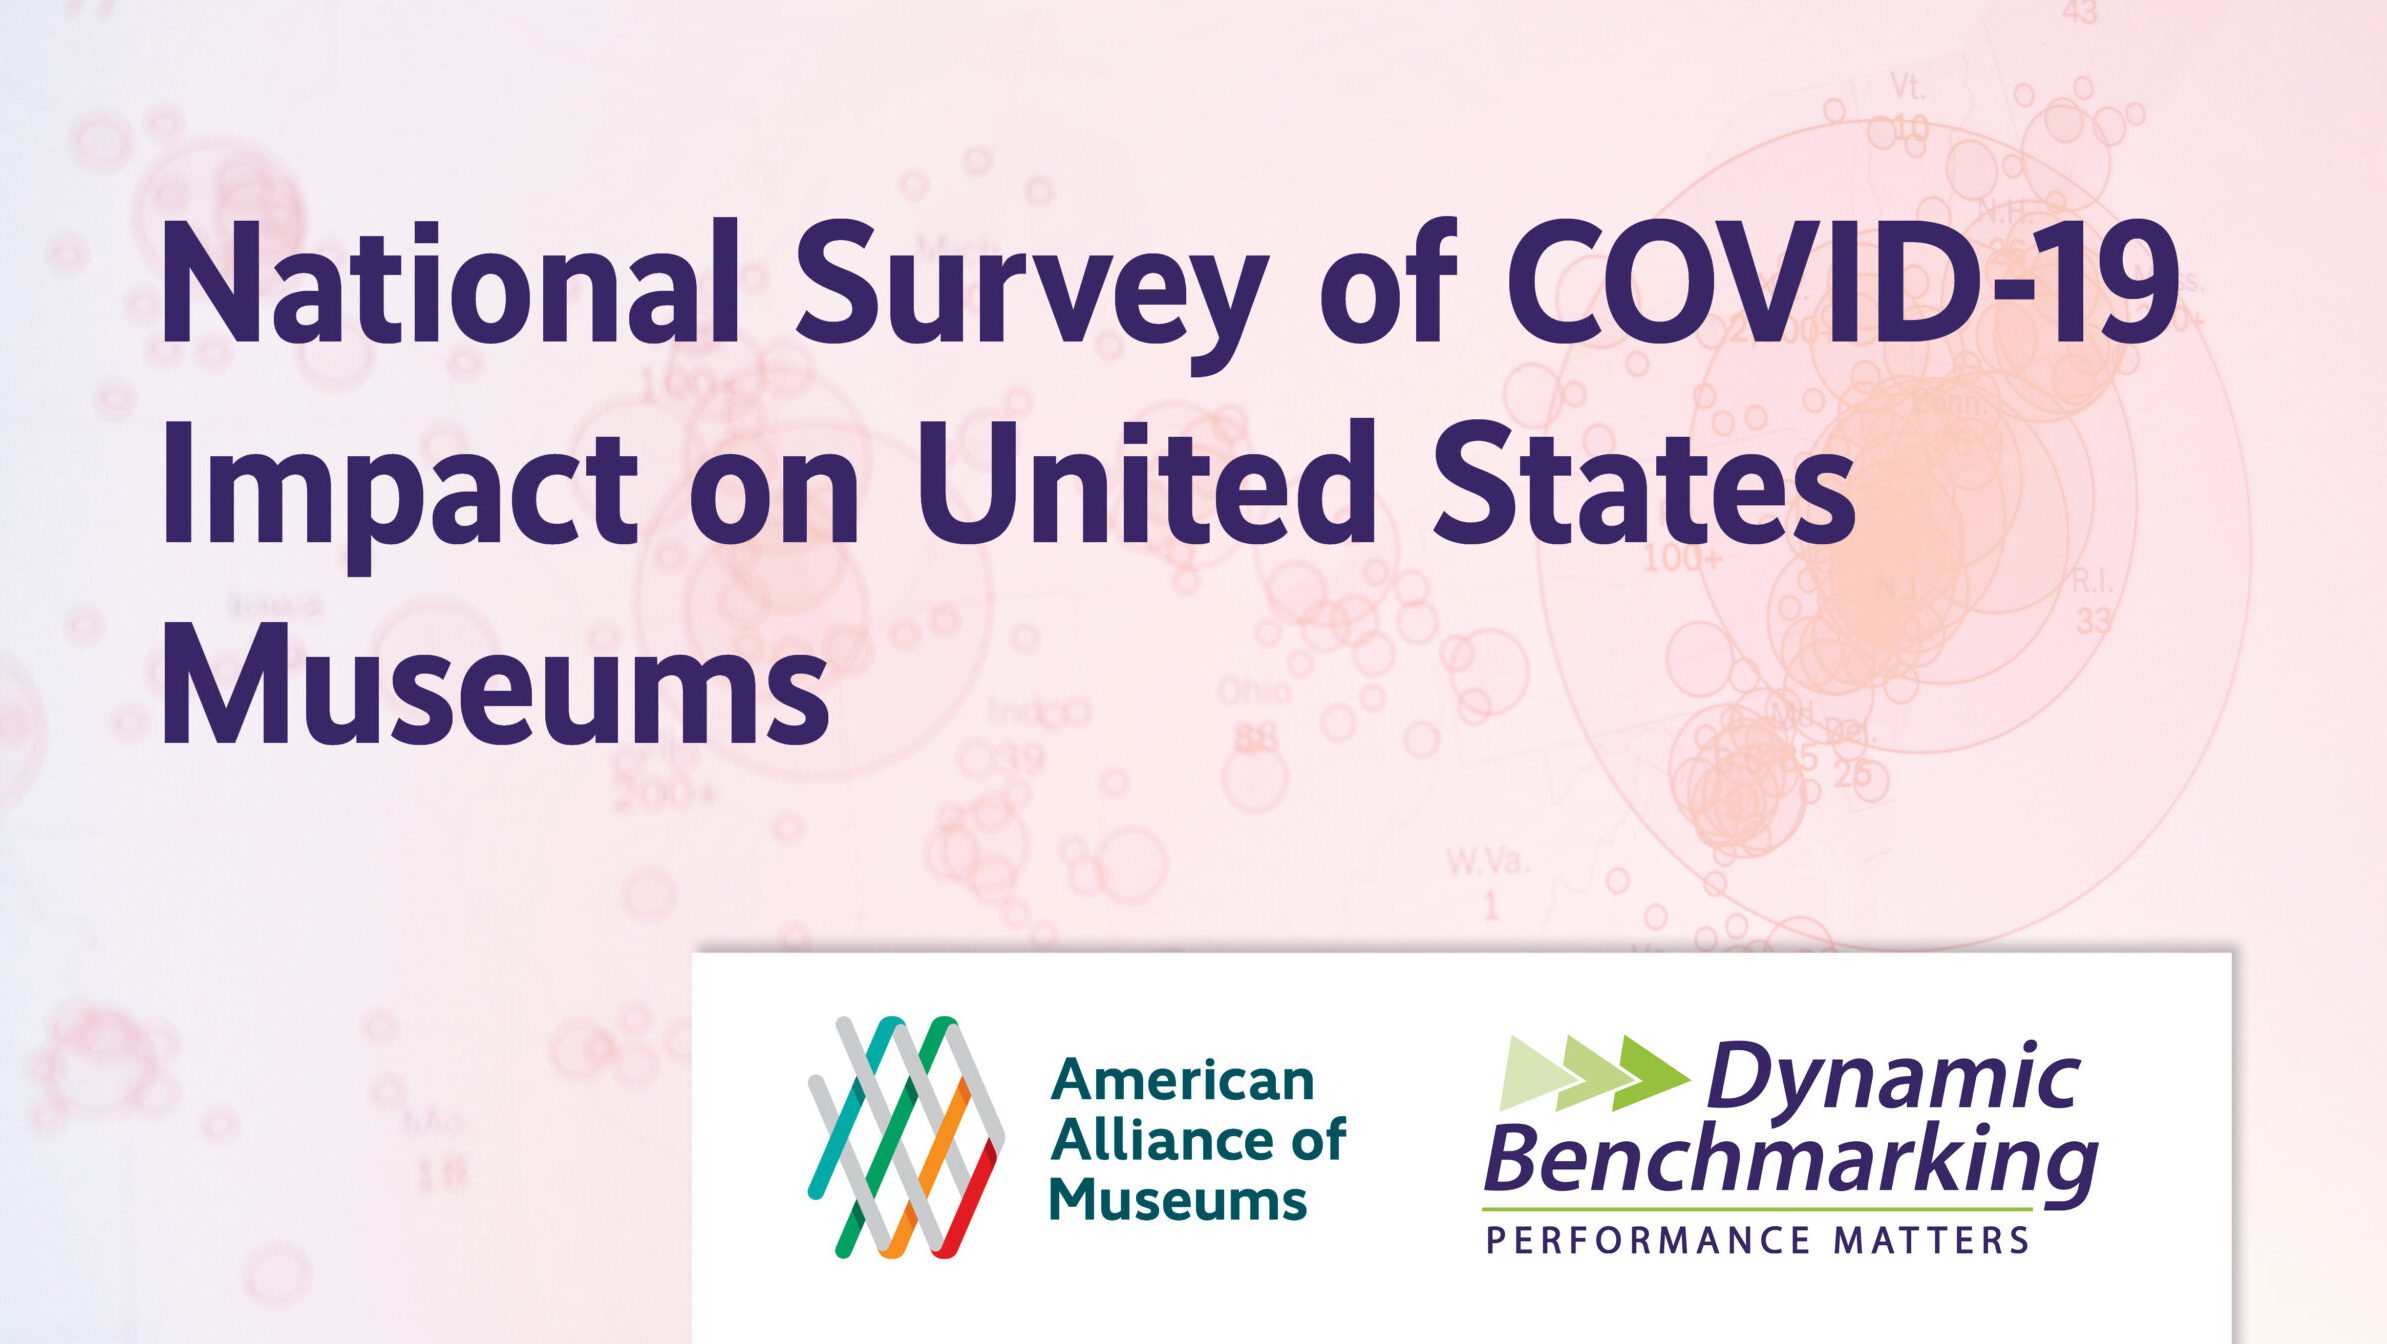 A graphic reading "National Survey of COVID-19 Impact on United States Museums" with the logos of the American Alliance of Museums and Dynamic Benchmarking